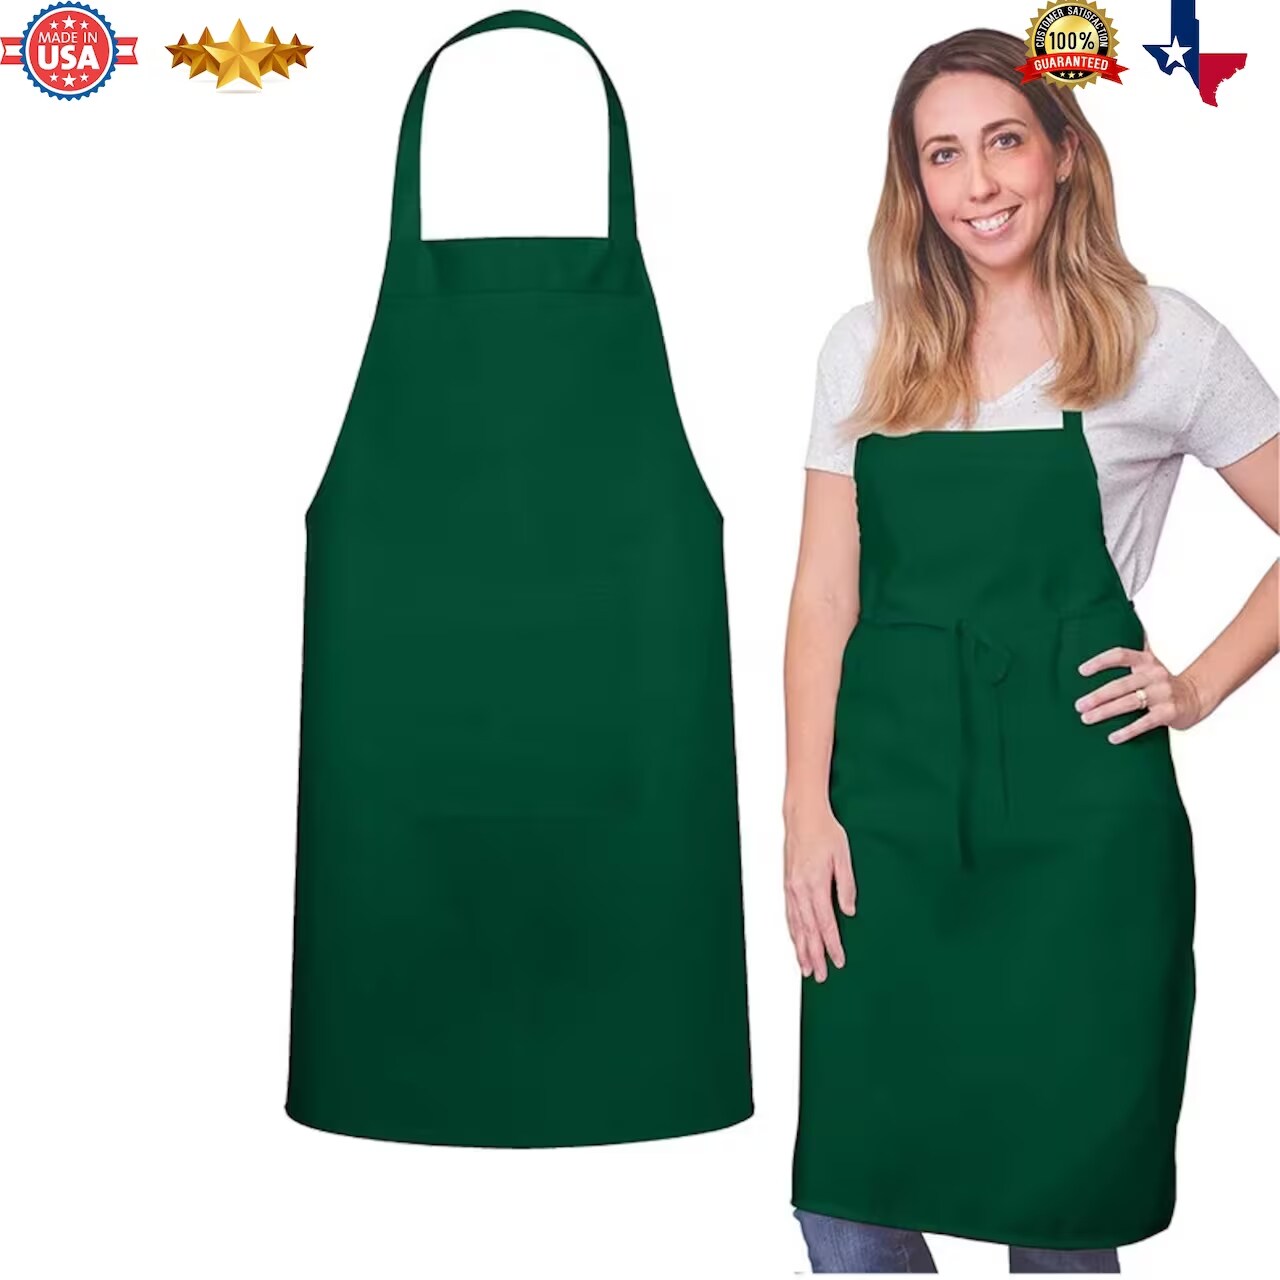 Radyan Bib Apron | Kitchen Crafting Bbq Drawing Outdoors | Apron for Men | Apron for Women | Embroidered Apron | Cooking Apron | Cute Apron